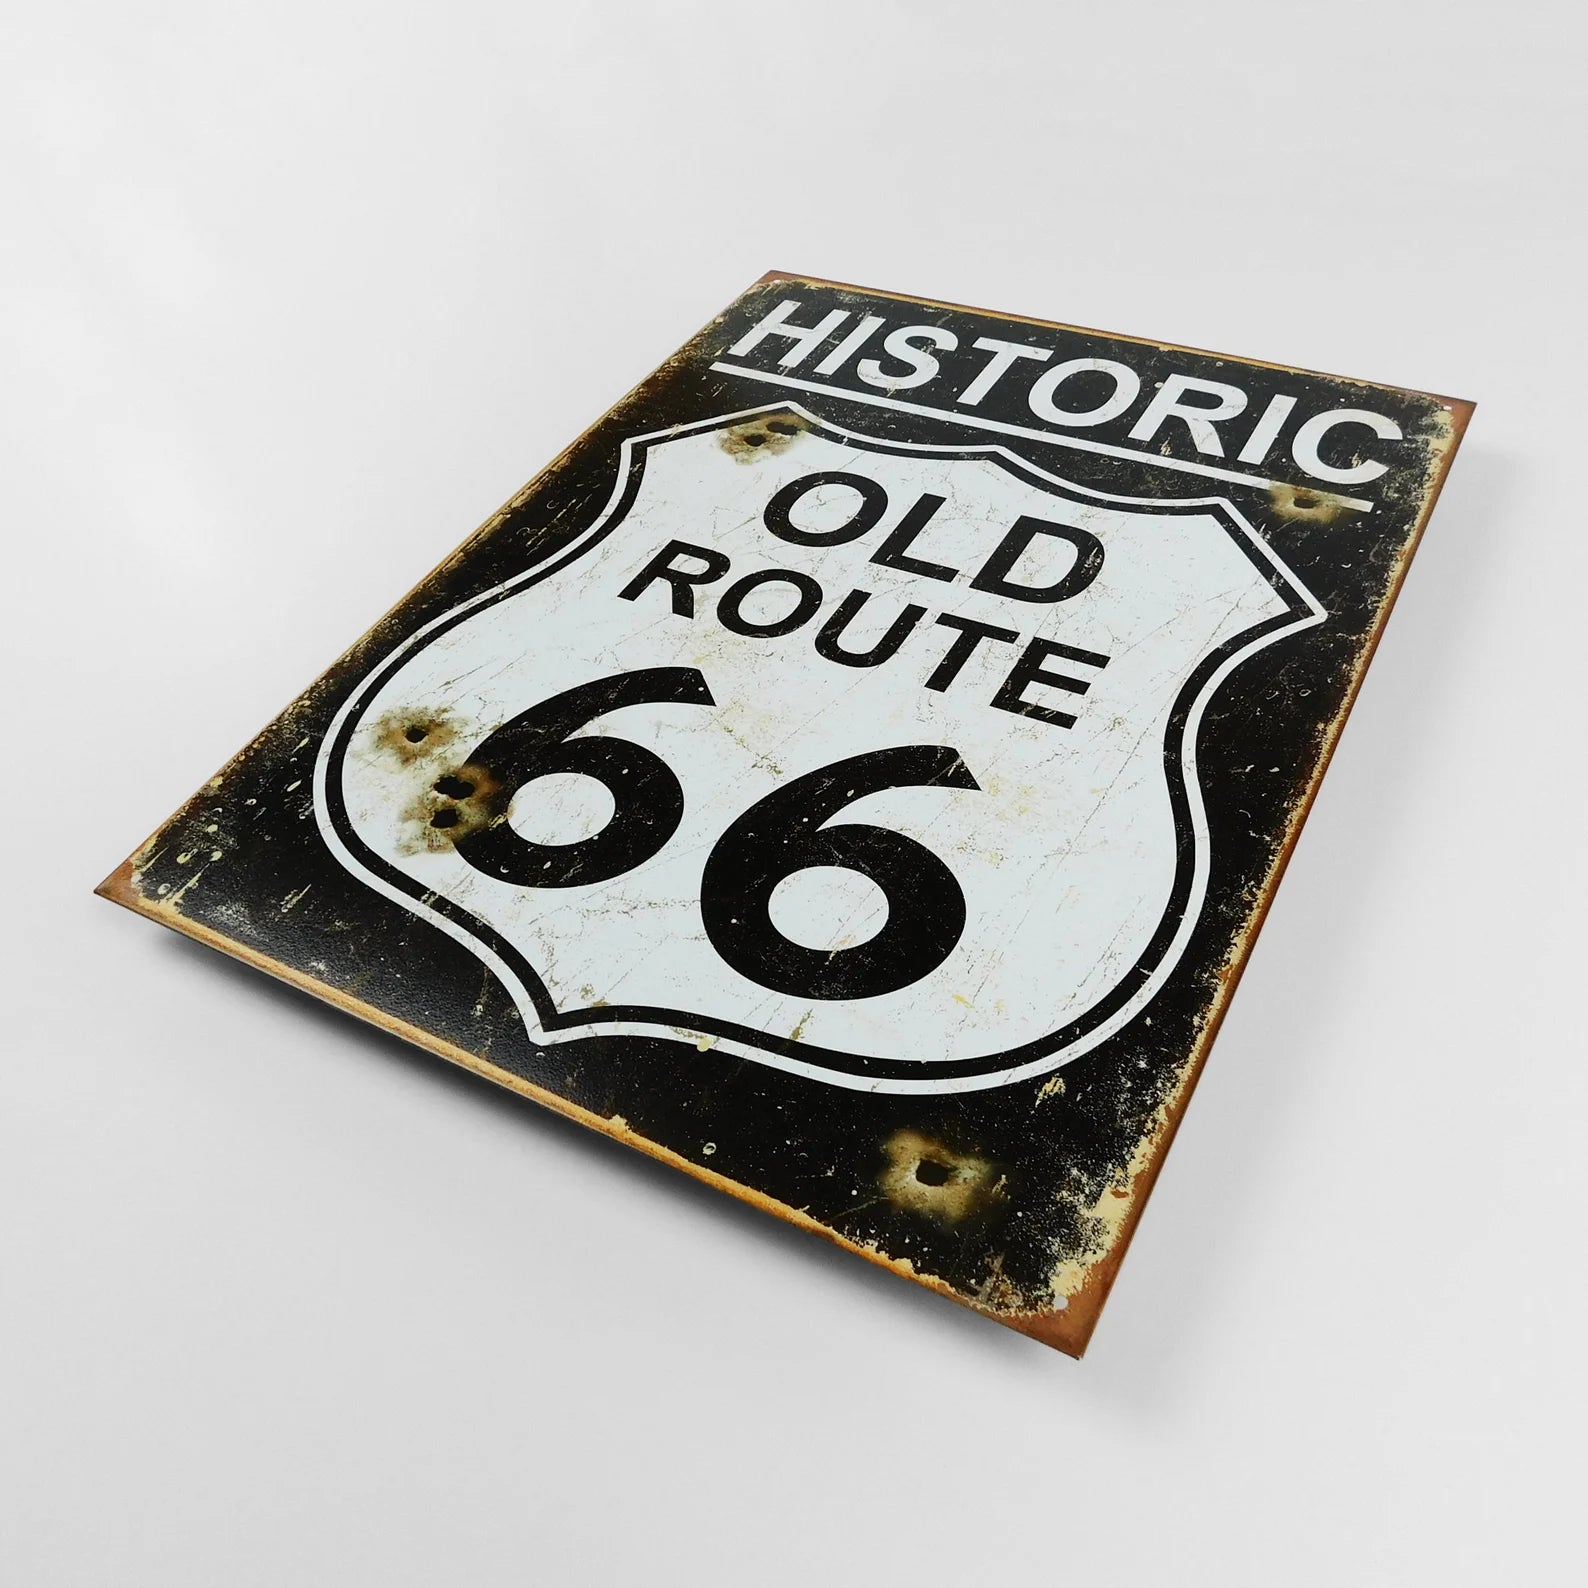 Historic Old Route 66 - Tin Metal Sign